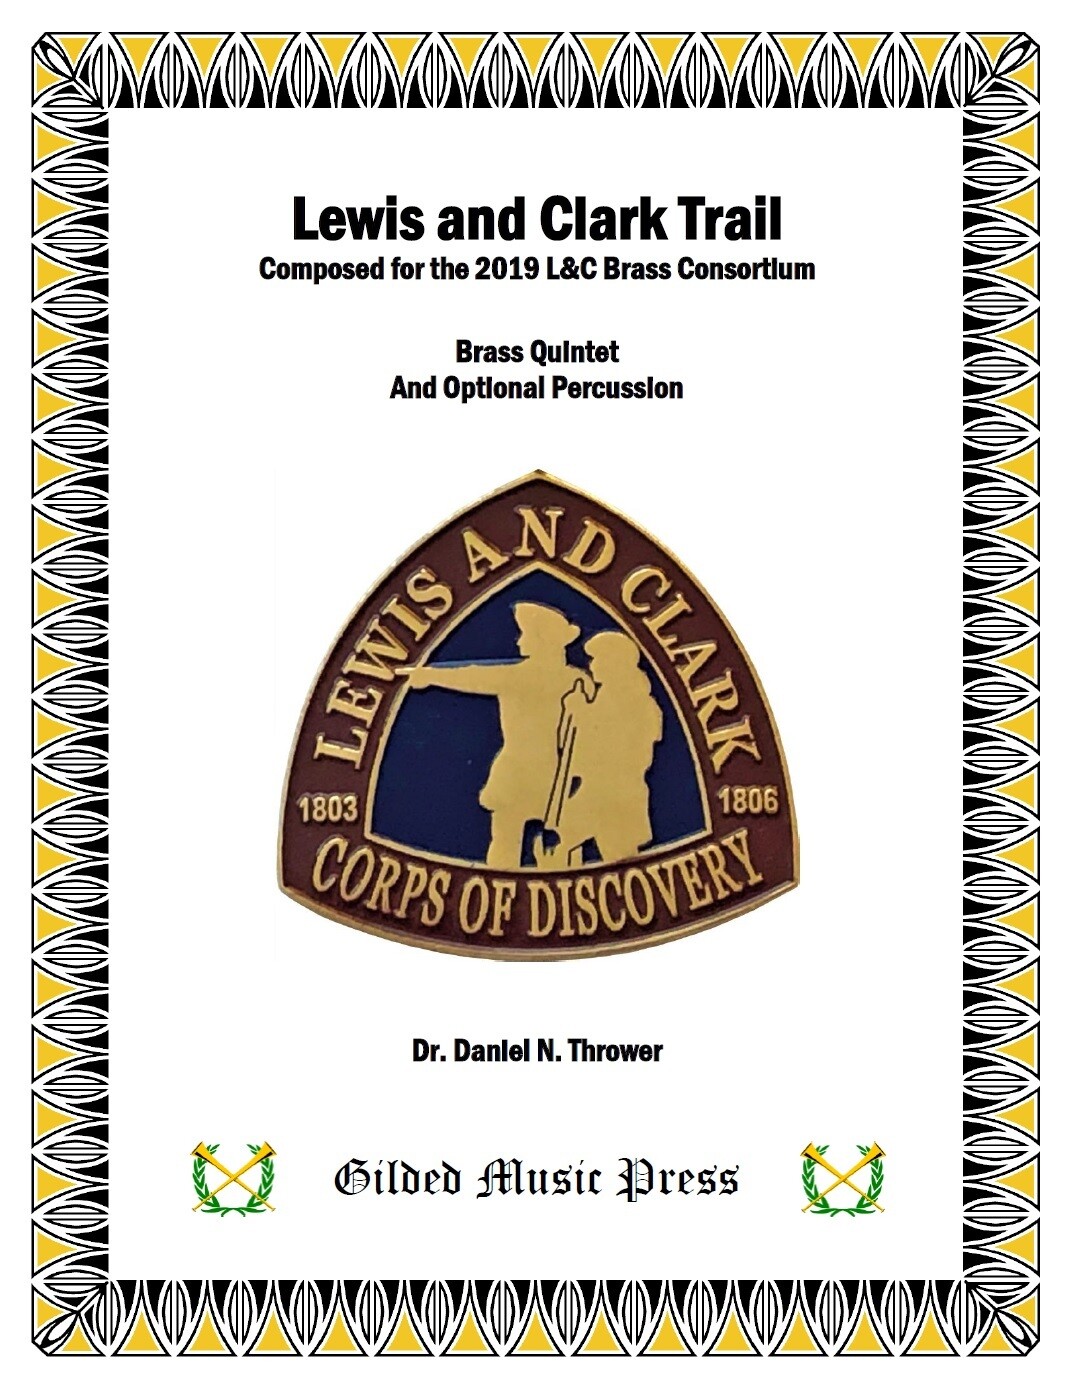 GMP 3012: Lewis and Clark Trail (Brass Quintet & Percussion), Dr. Daniel Thrower